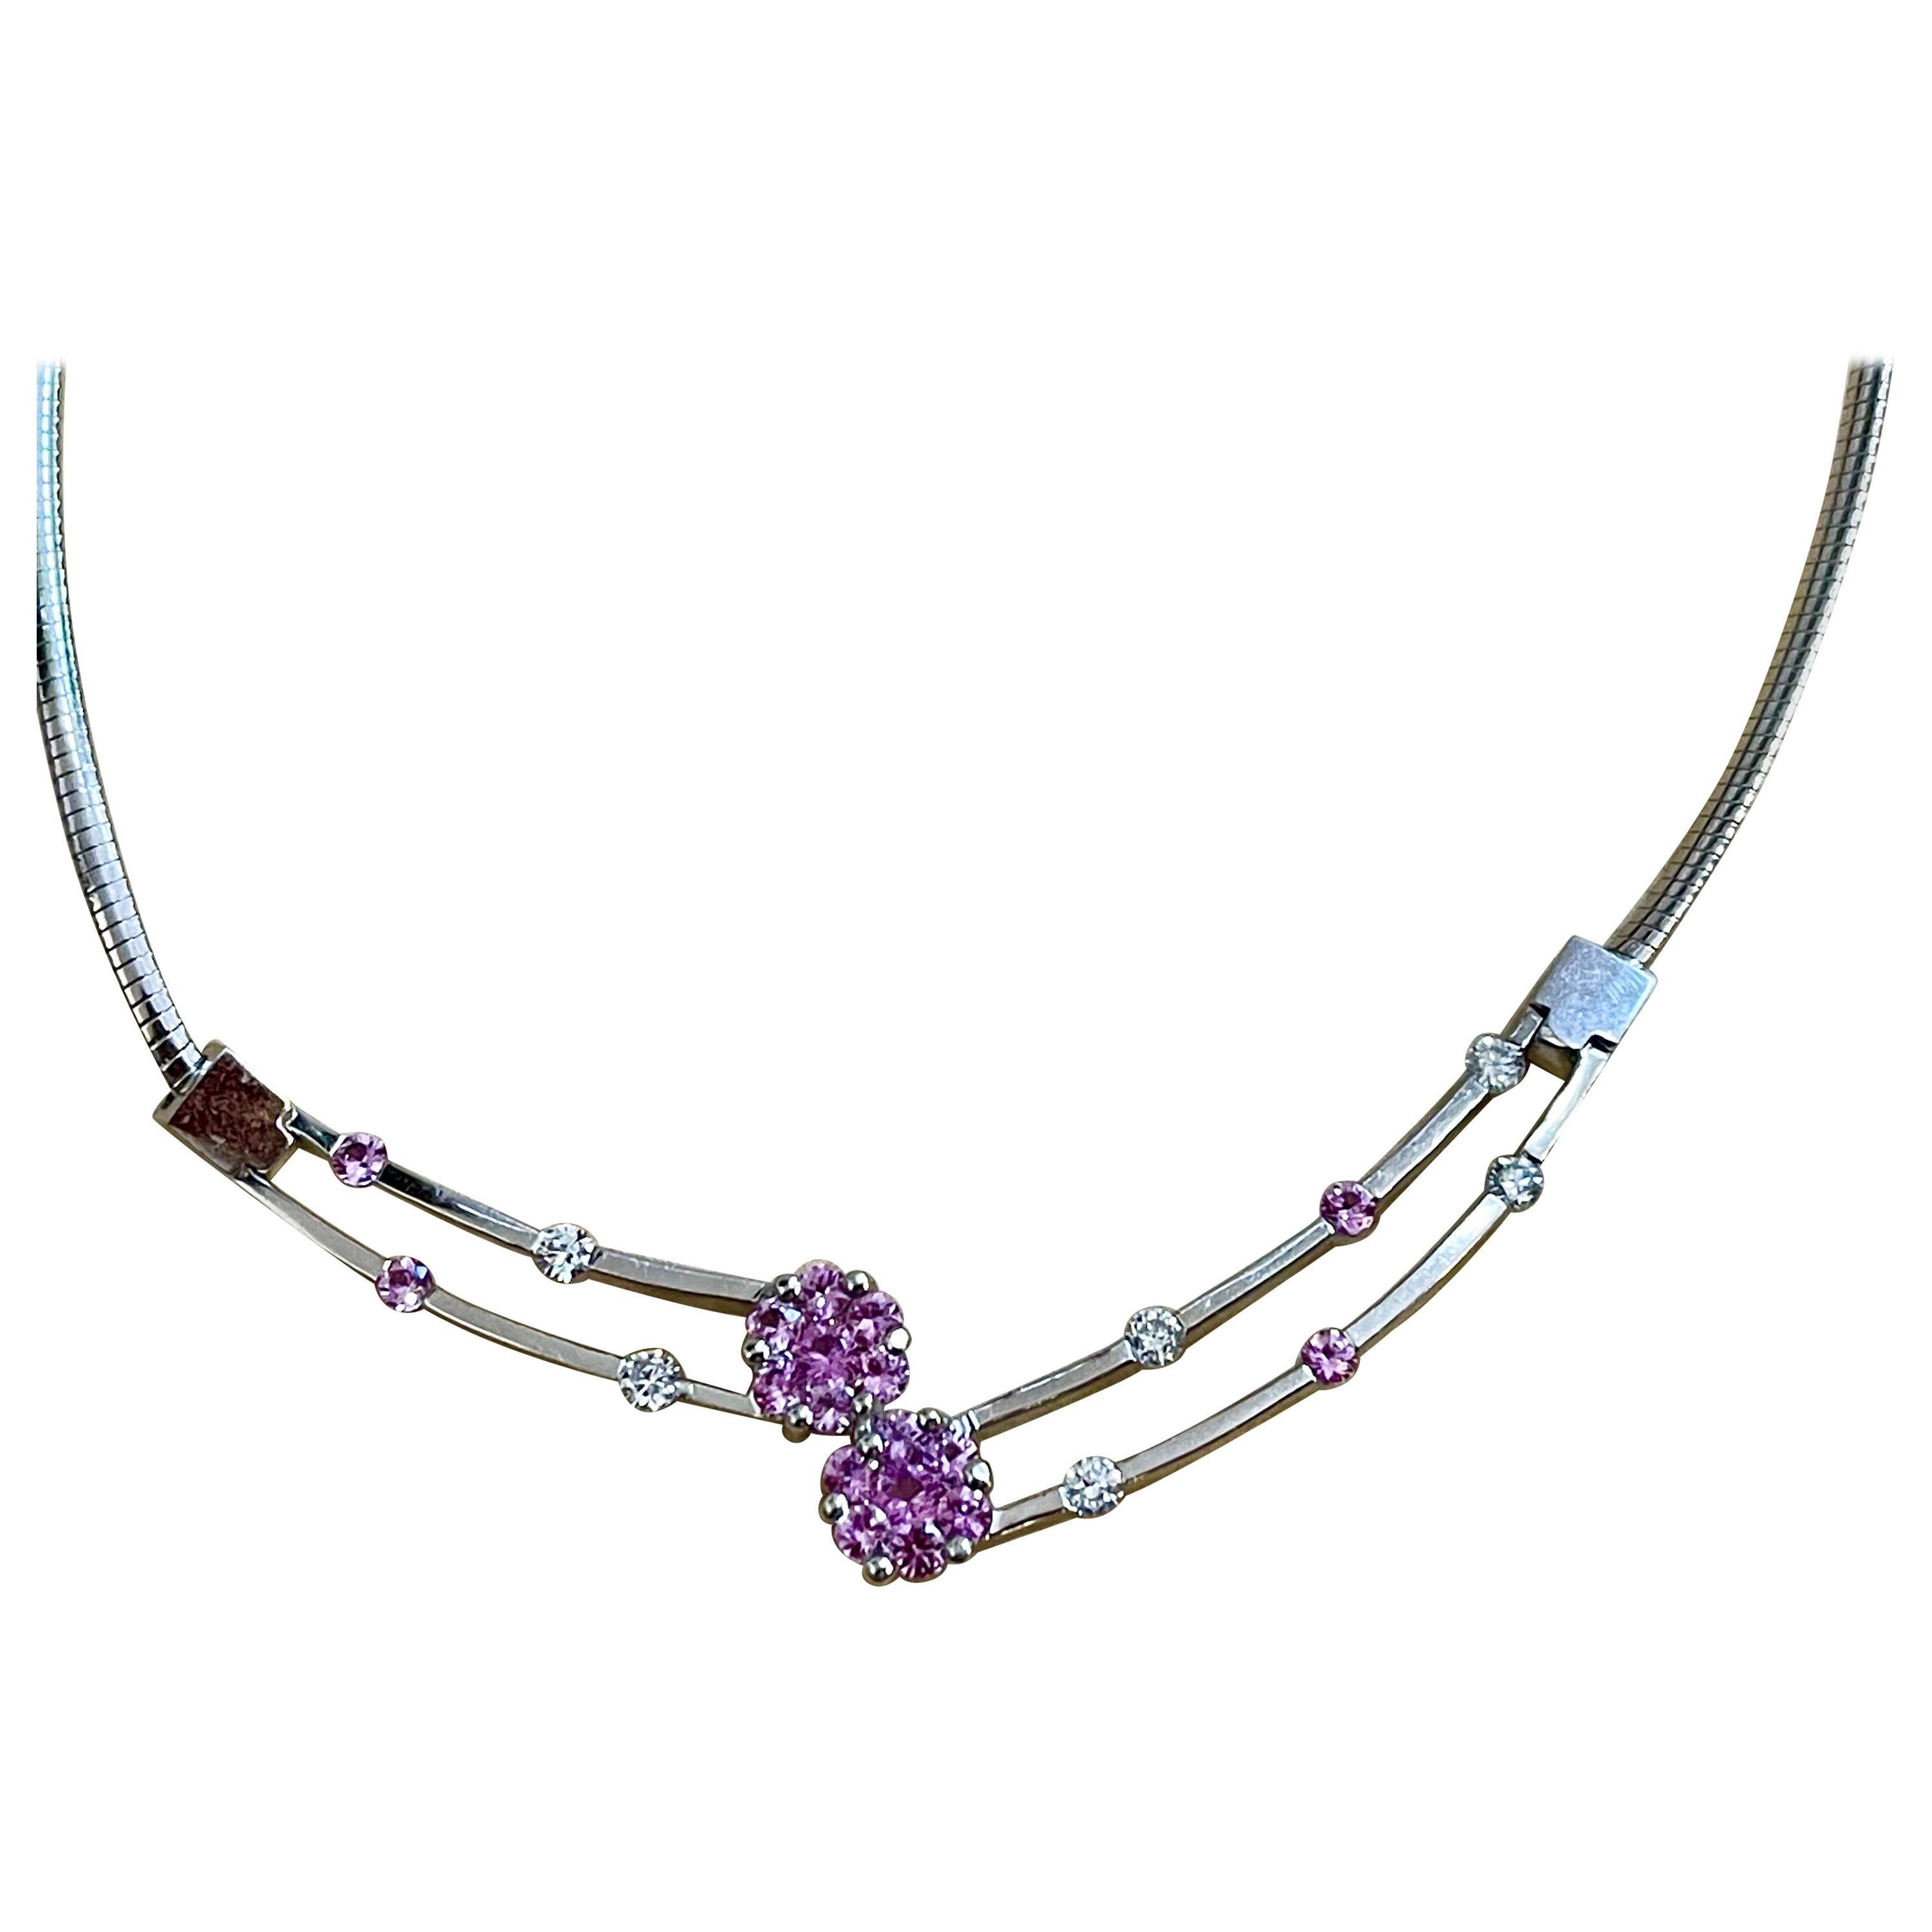 14 Karat White Gold Omega Necklace with Pink Sapphire and Diamonds, Italy